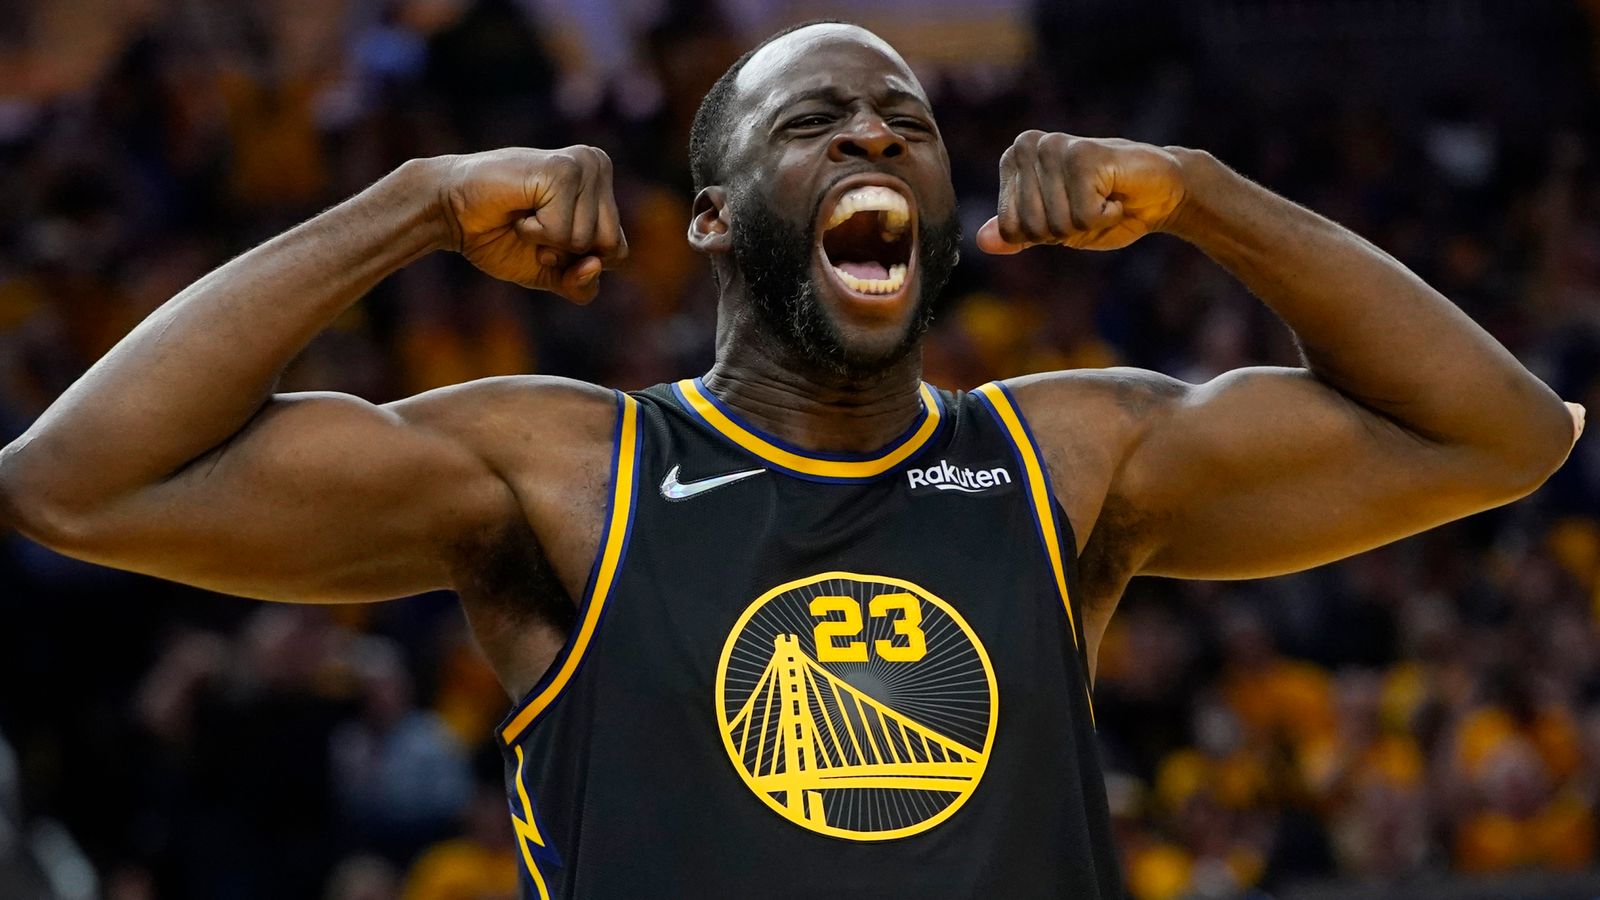 Stephen Curry, Klay Thompson and Draymond Green: Warriors’ Big Three are back as trio set to make sixth NBA Finals appearance